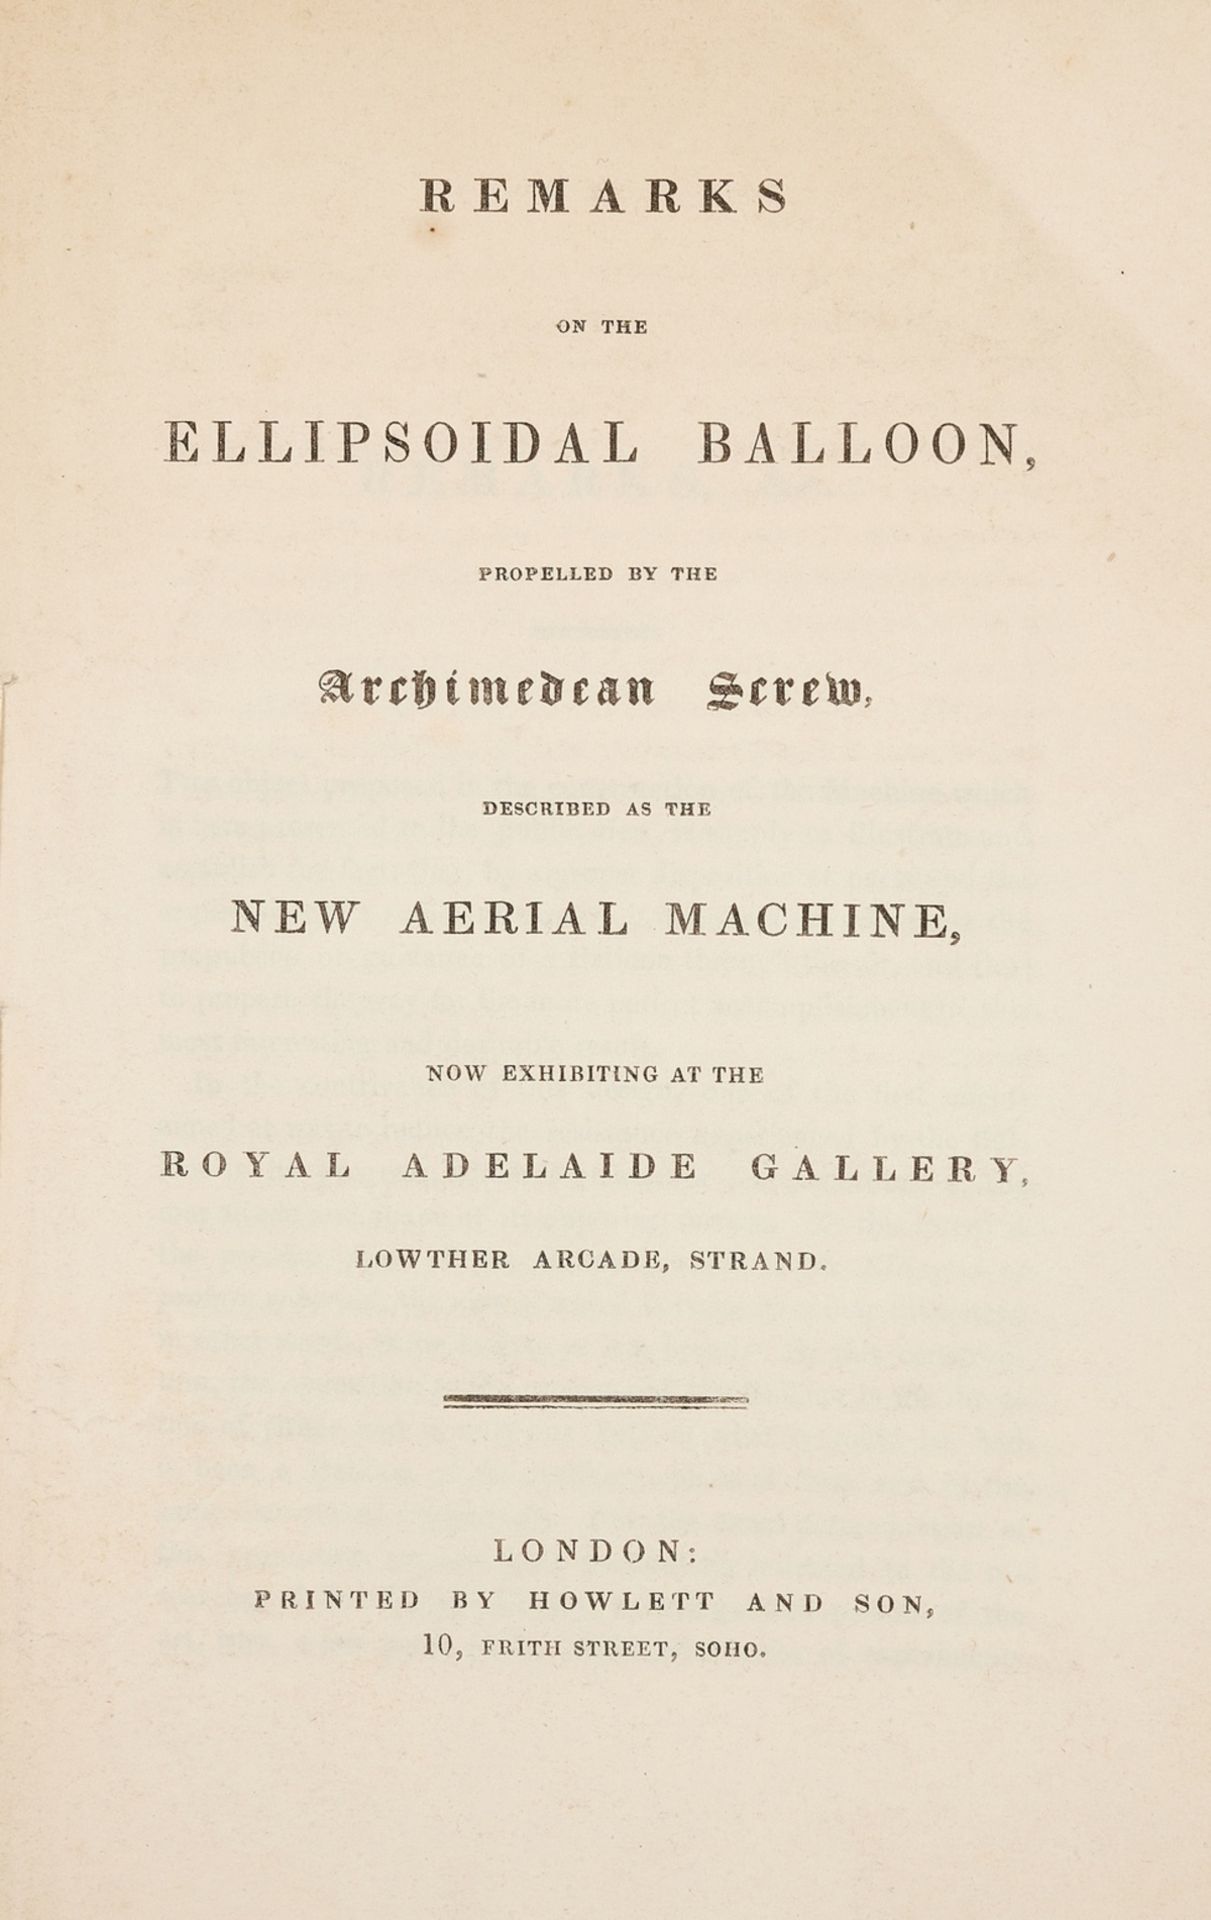 Ballooning.- Remarks on the Ellipsoidal Balloon, propelled by the Archimedean Screw, described as …